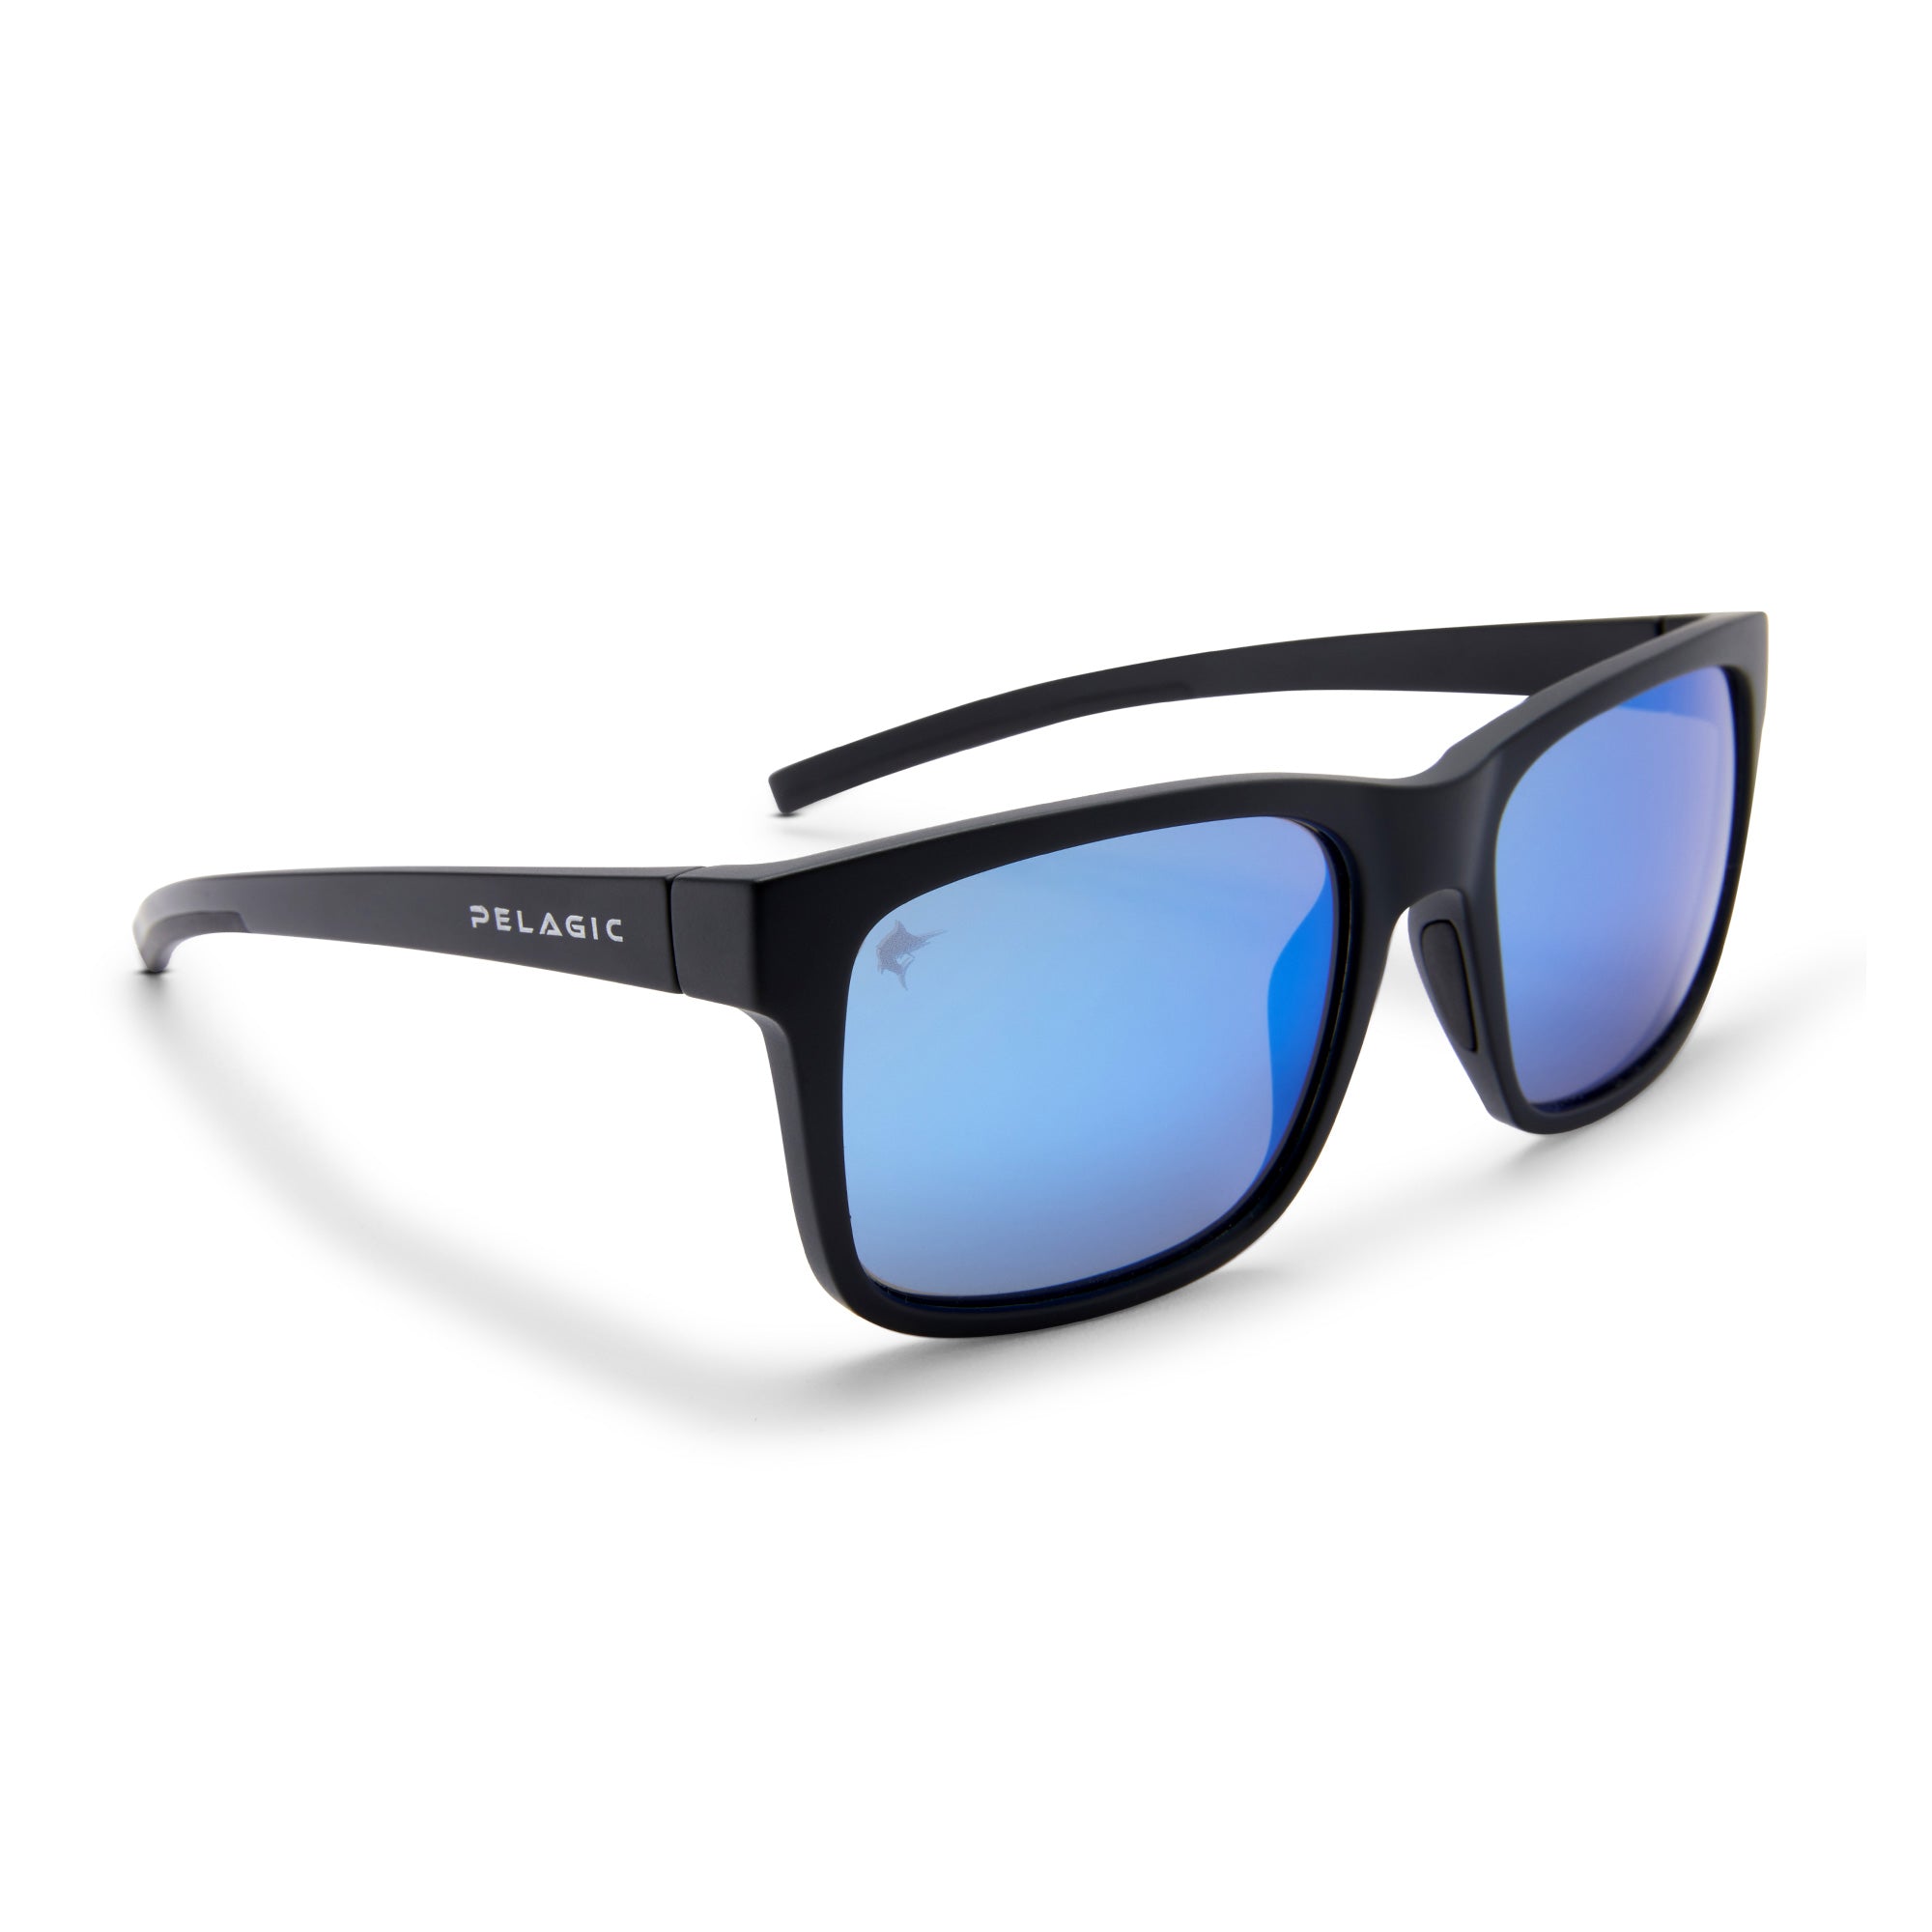  Epoch Delta 2 Watersports Fishing Sunglasses Black Frame with  Polarized Super-Hydrophobic Blue Mirror Lens : Clothing, Shoes & Jewelry